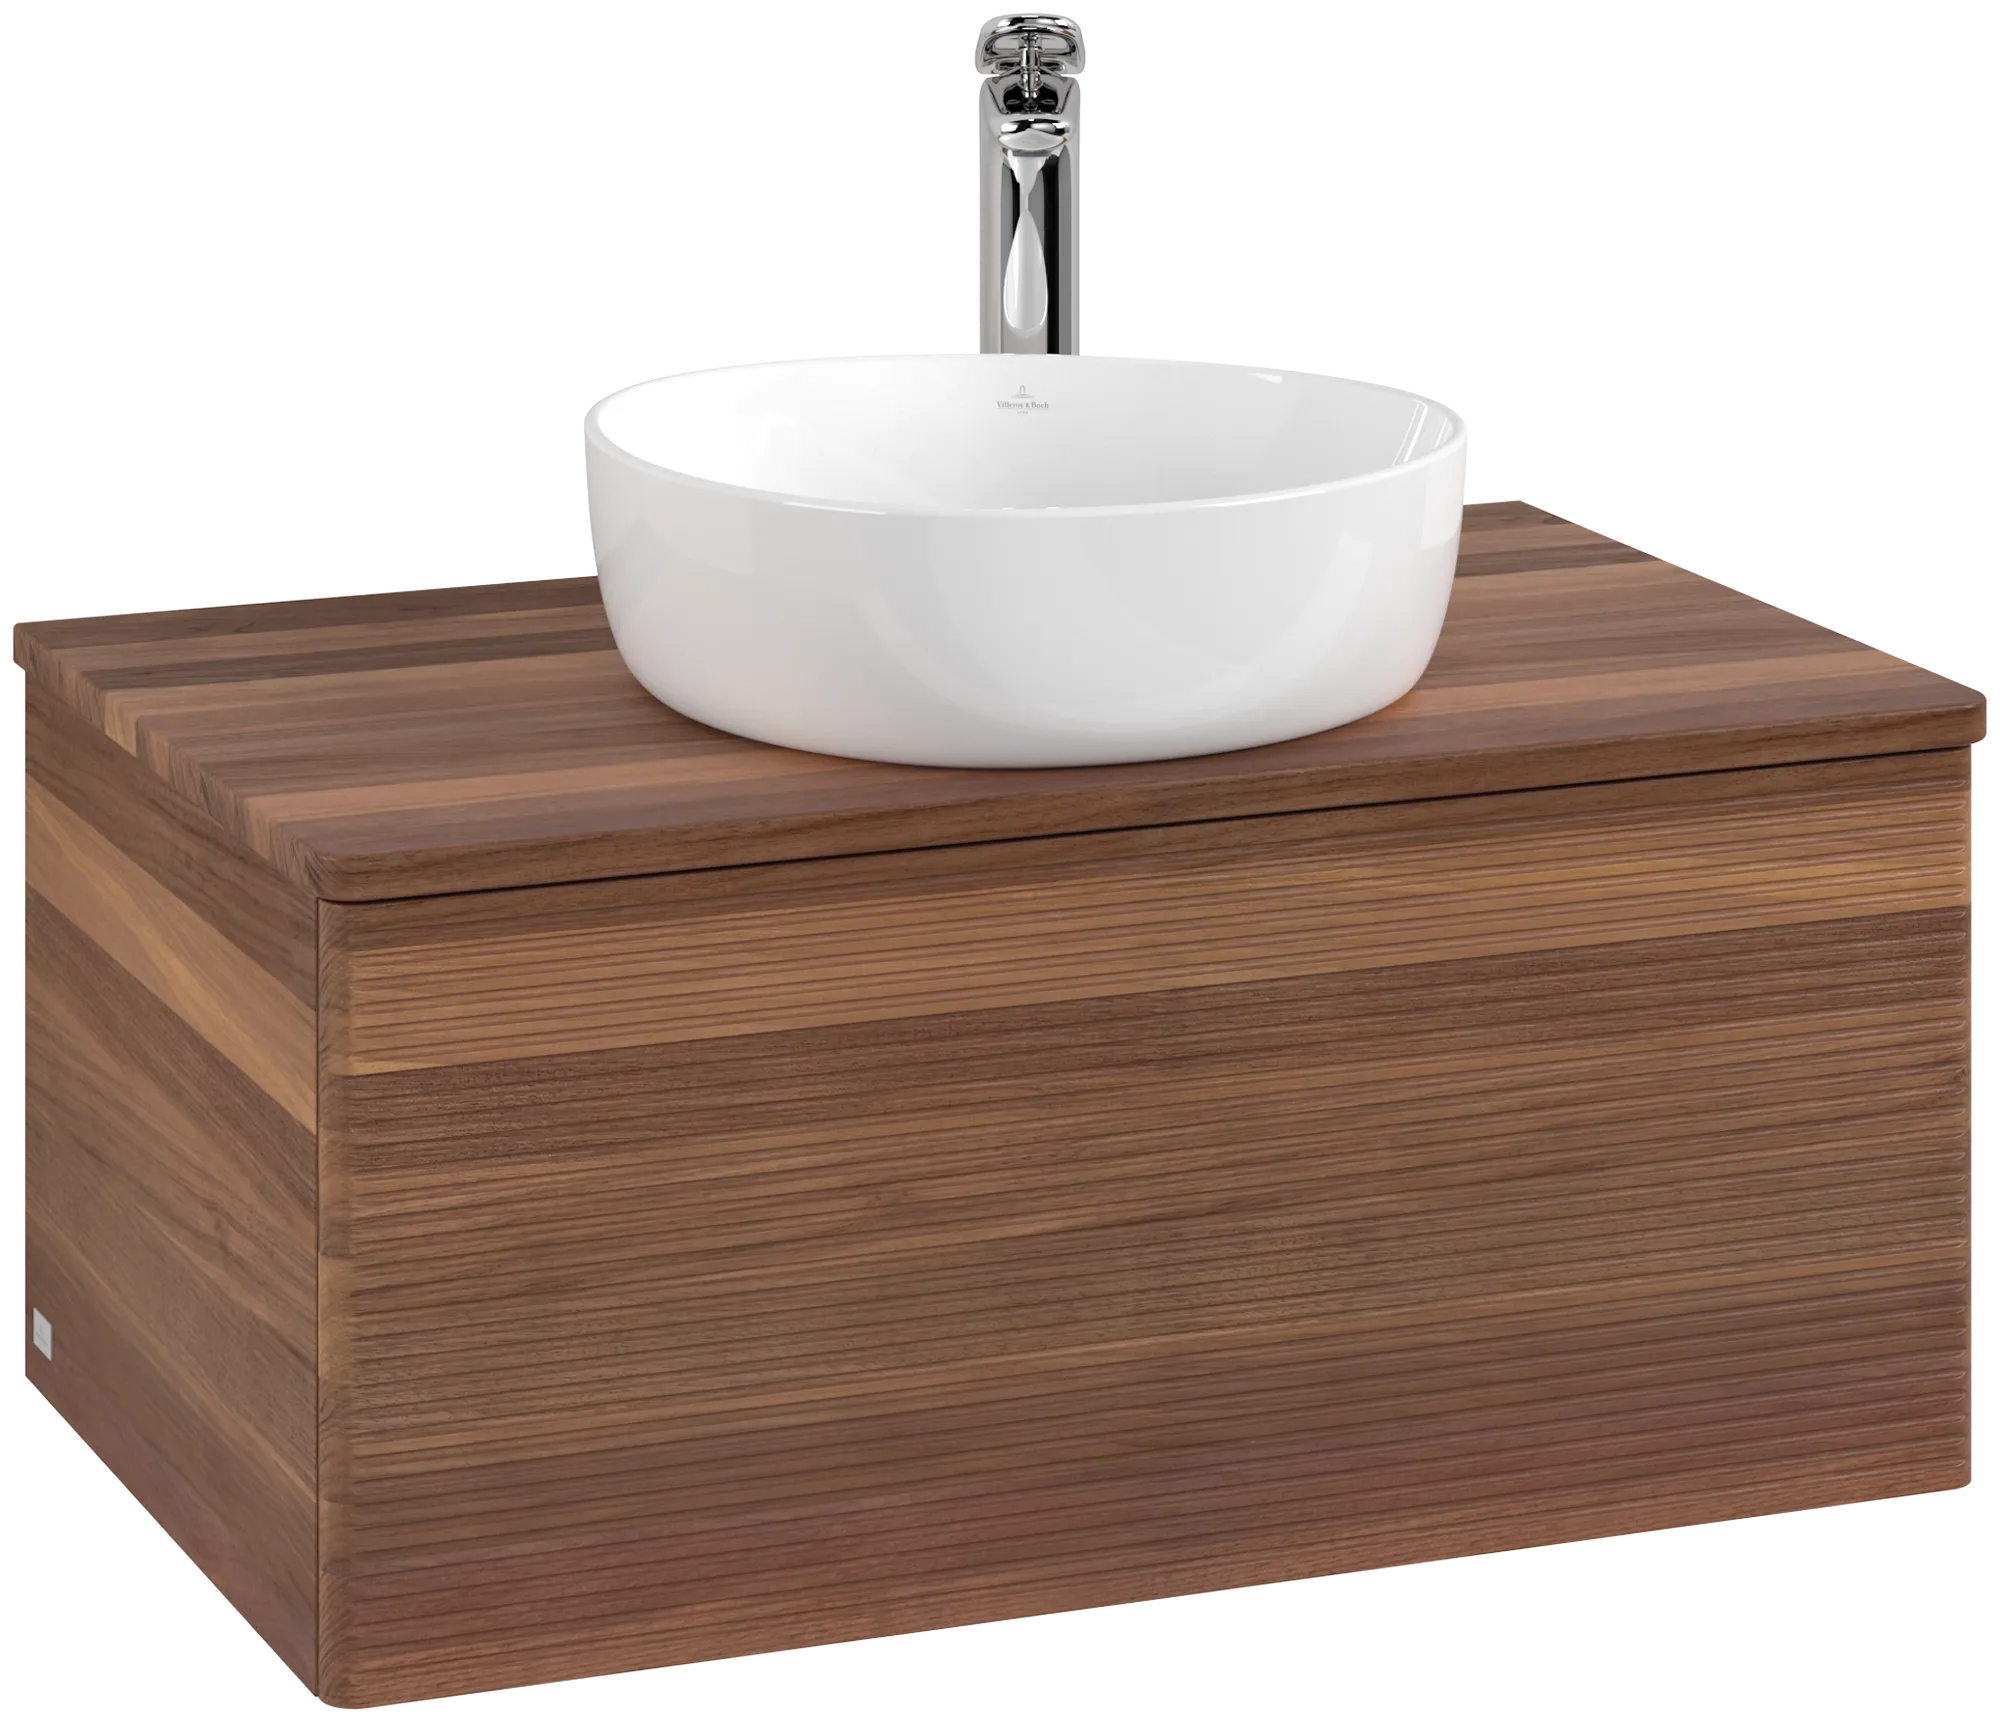 Picture of VILLEROY BOCH Antao Vanity unit, with lighting, 1 pull-out compartment, 800 x 360 x 500 mm, Front with grain texture, Warm Walnut / Warm Walnut #L30152HM